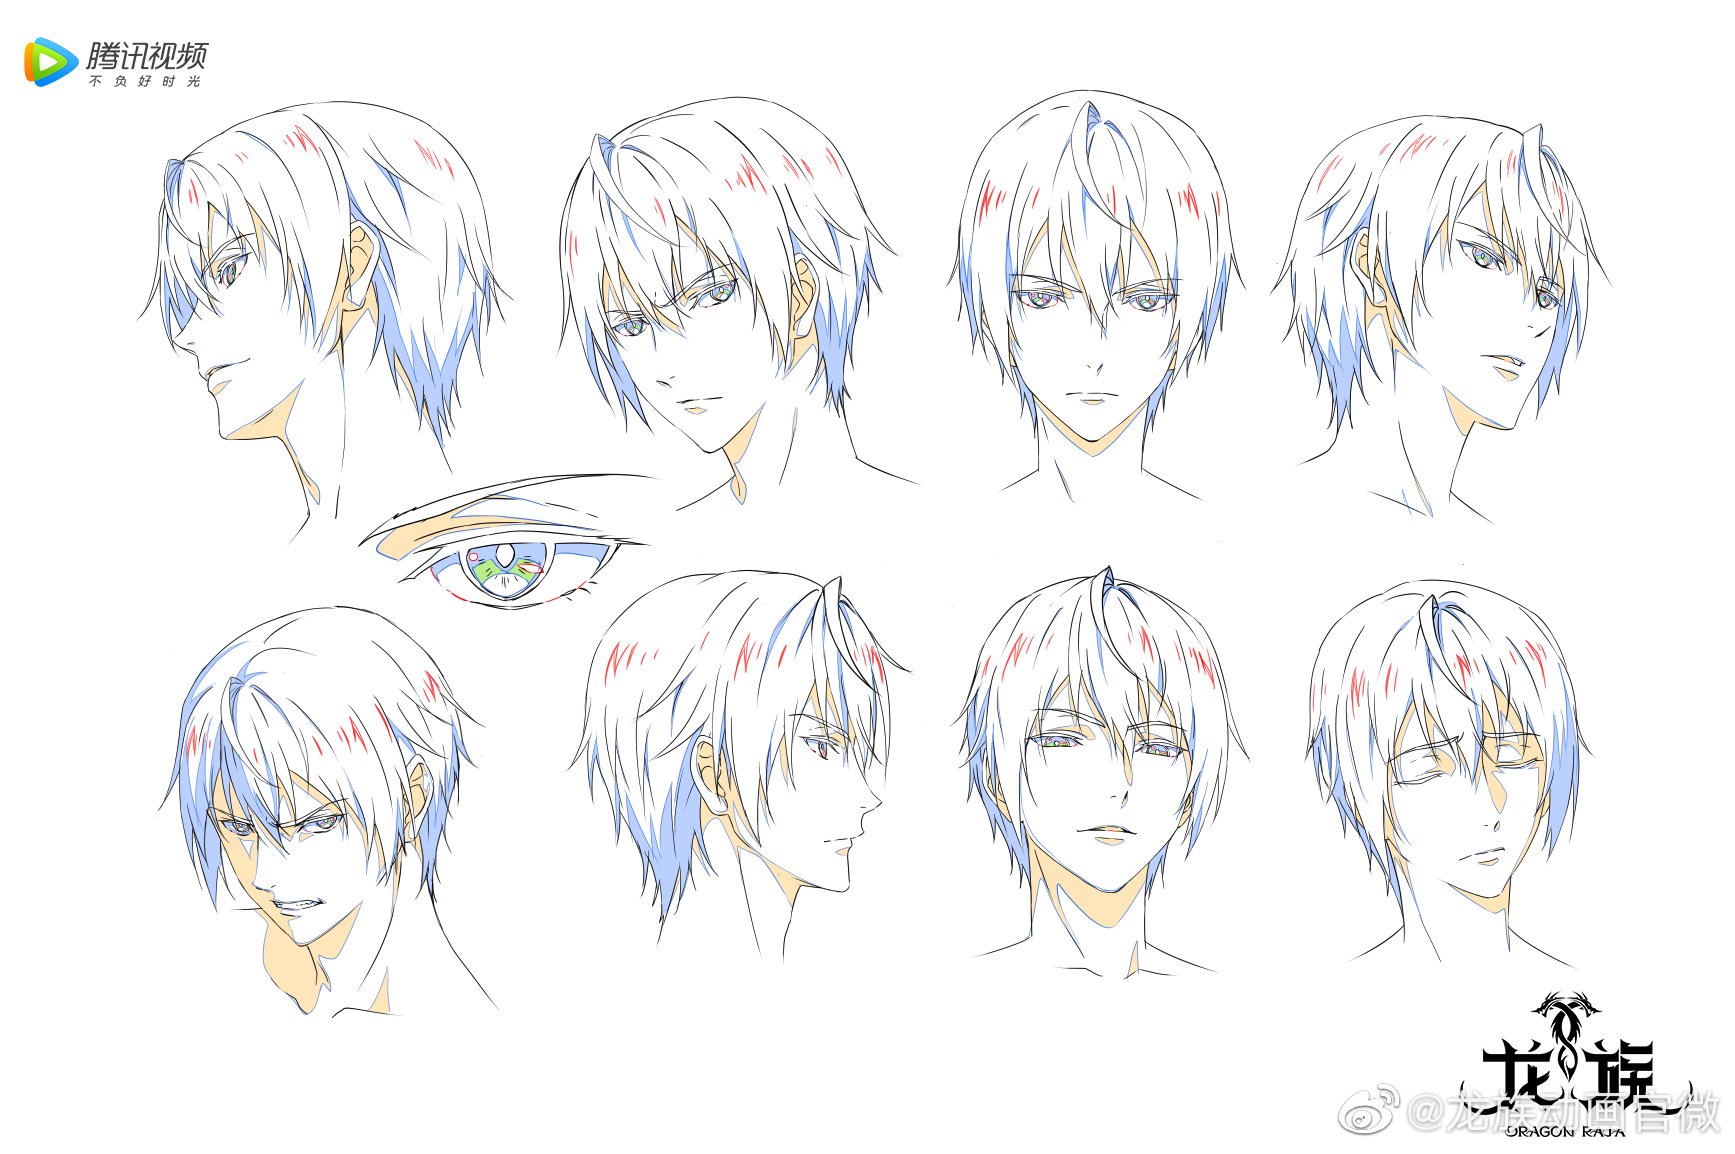 hectab — Caesar Gattuso - Official anime character design.